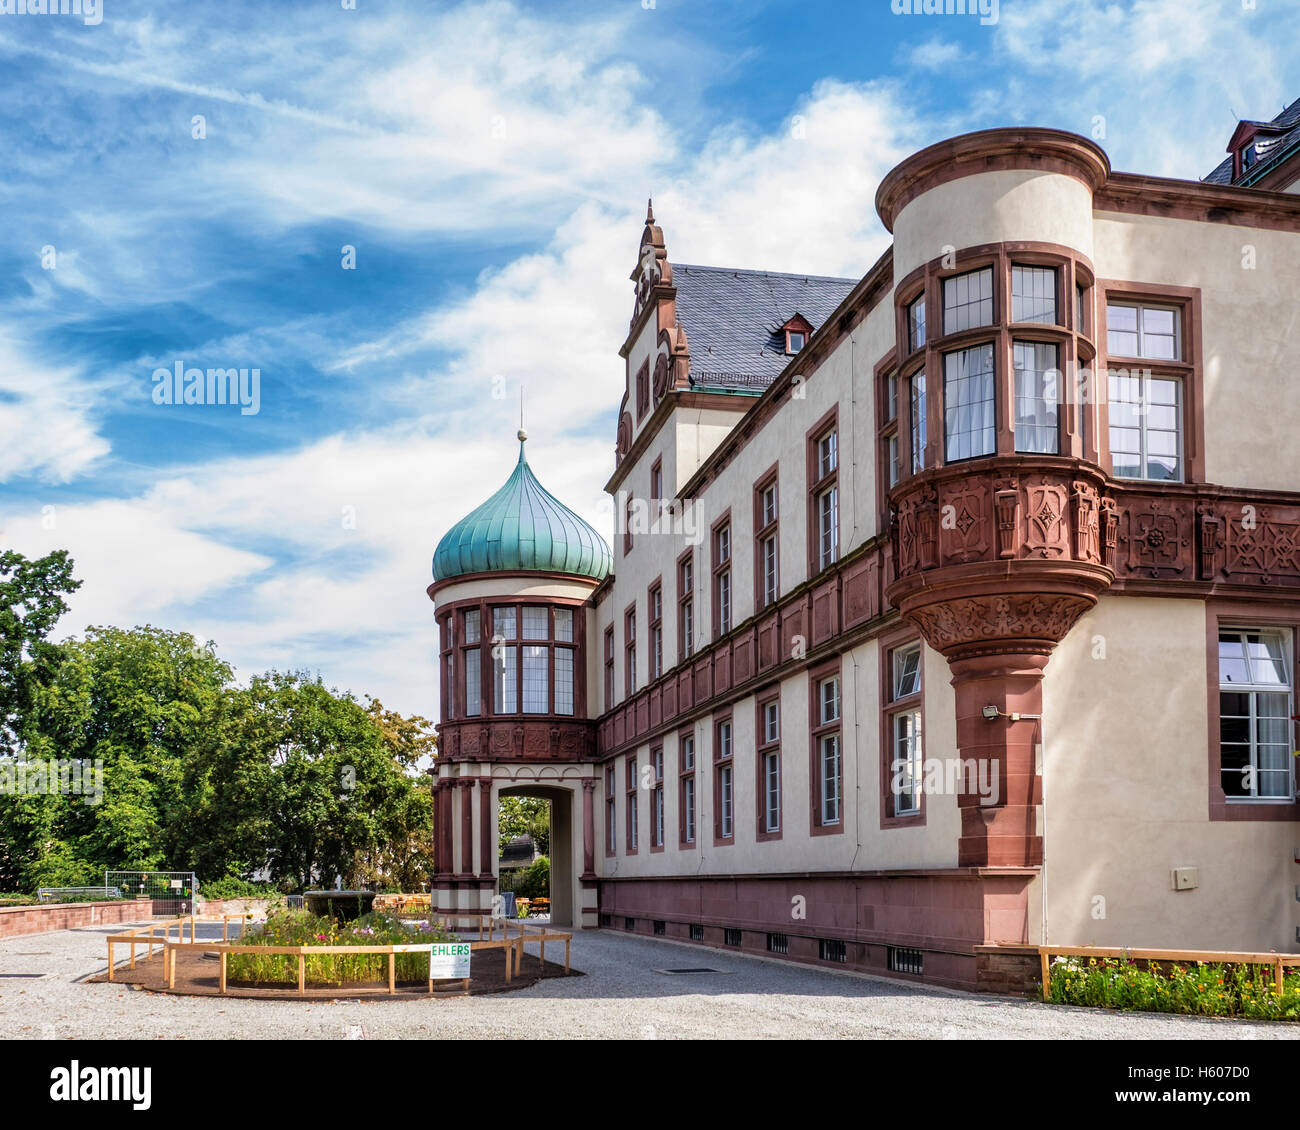 Darmstadt, Hesse, Germany. The Stadtschloss (City Palace) or Residential Palace (Residenzschloss) building exterior Stock Photo